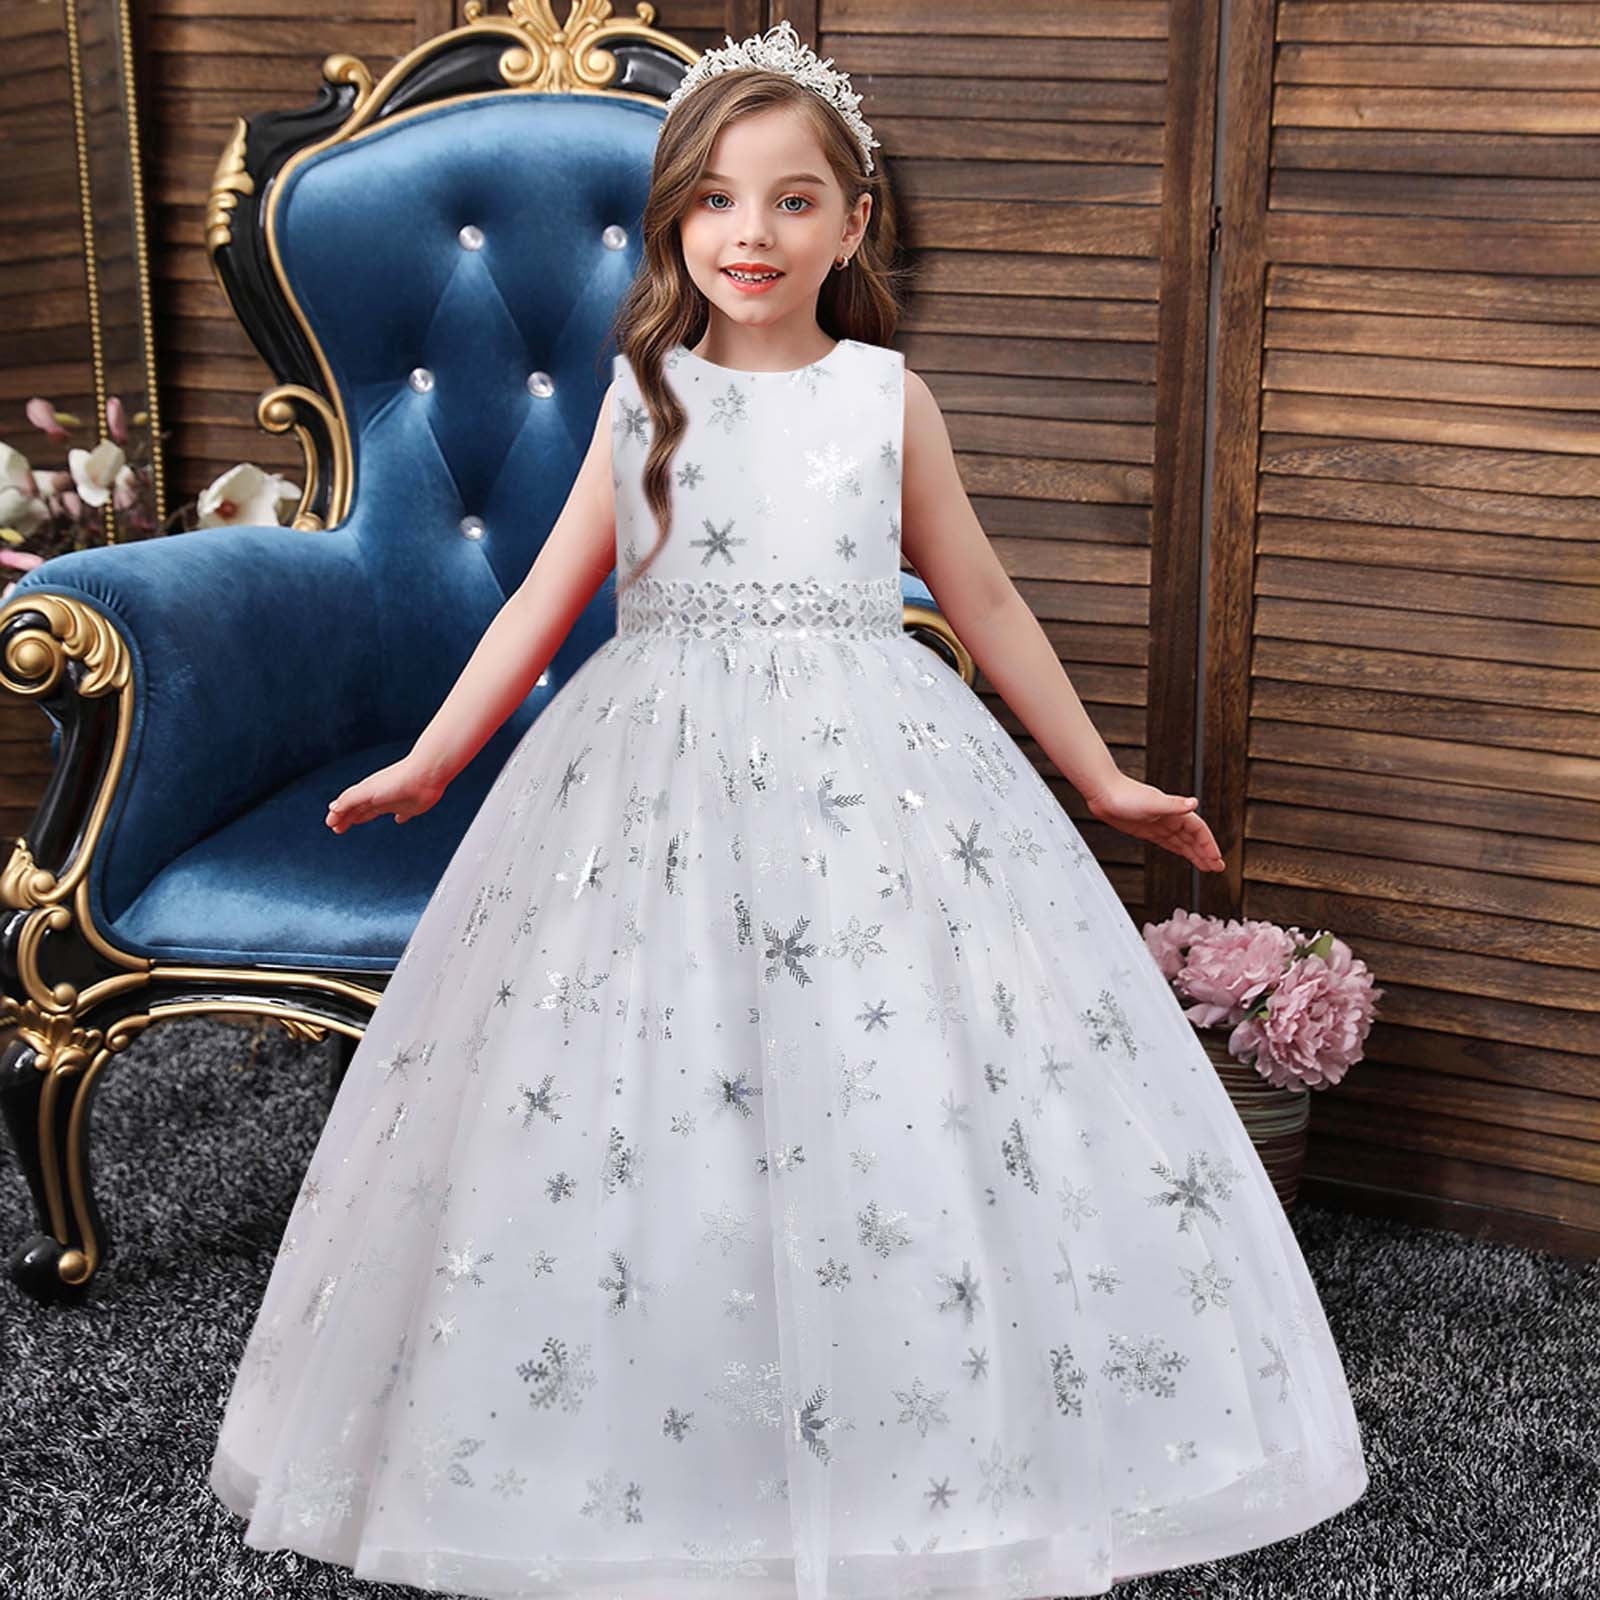 Floral Lace Princess Ball Gown First Communion Dress Celestial 3305 |  Communion dresses, First communion dresses, Girls communion dresses